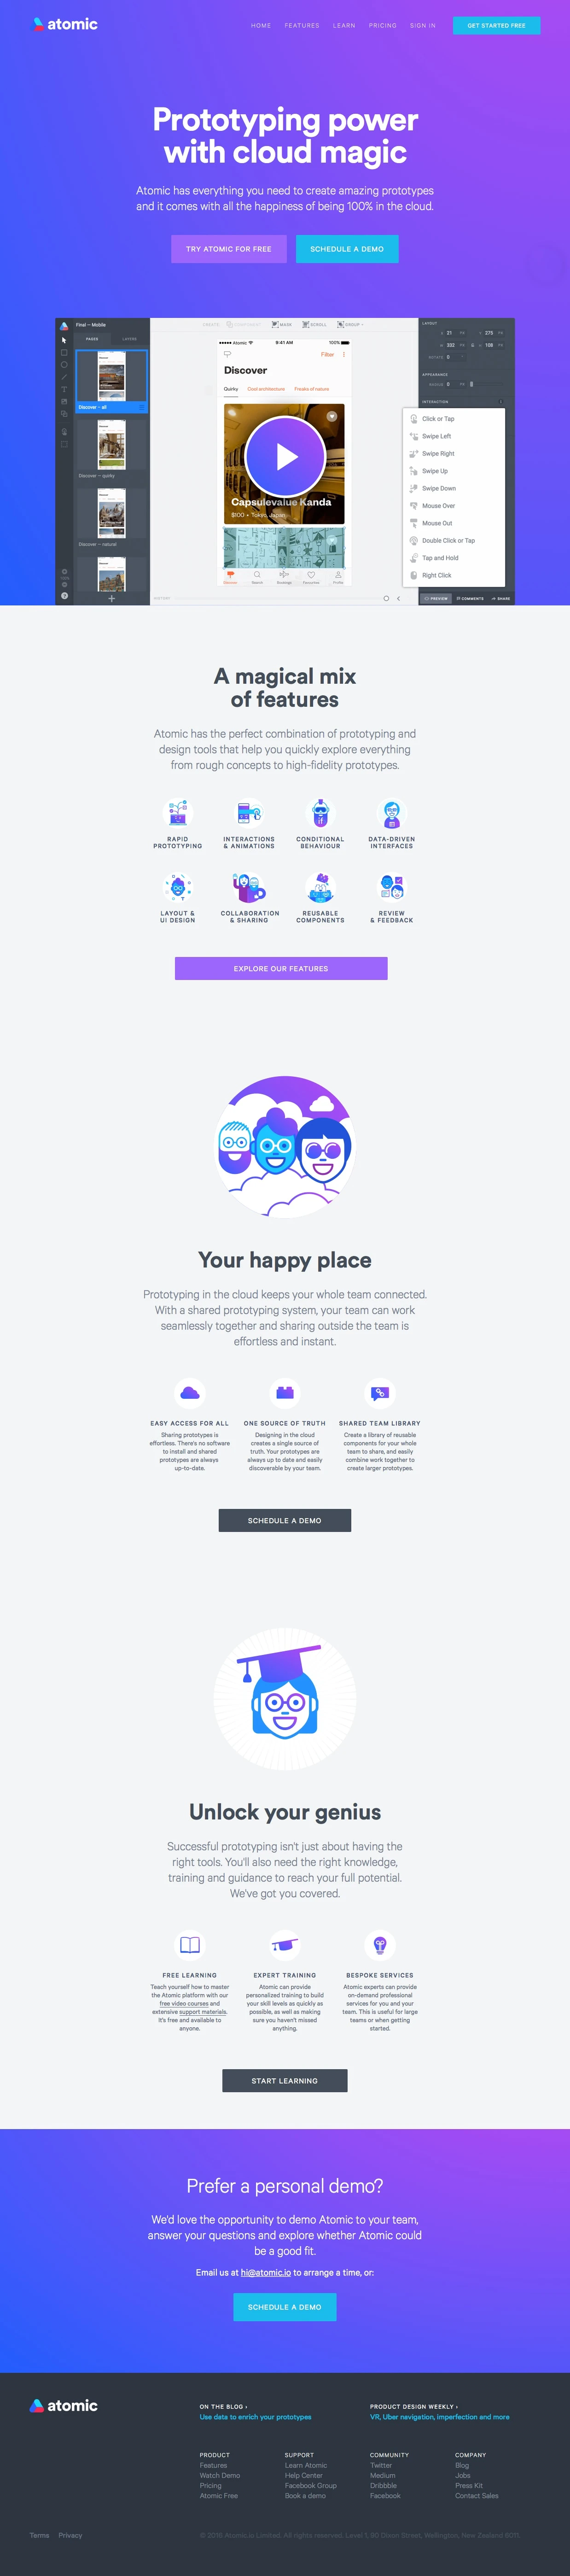 Atomic Landing Page Example: Atomic has everything you need to create amazing prototypes and it comes with all the happiness of being 100% in the cloud.